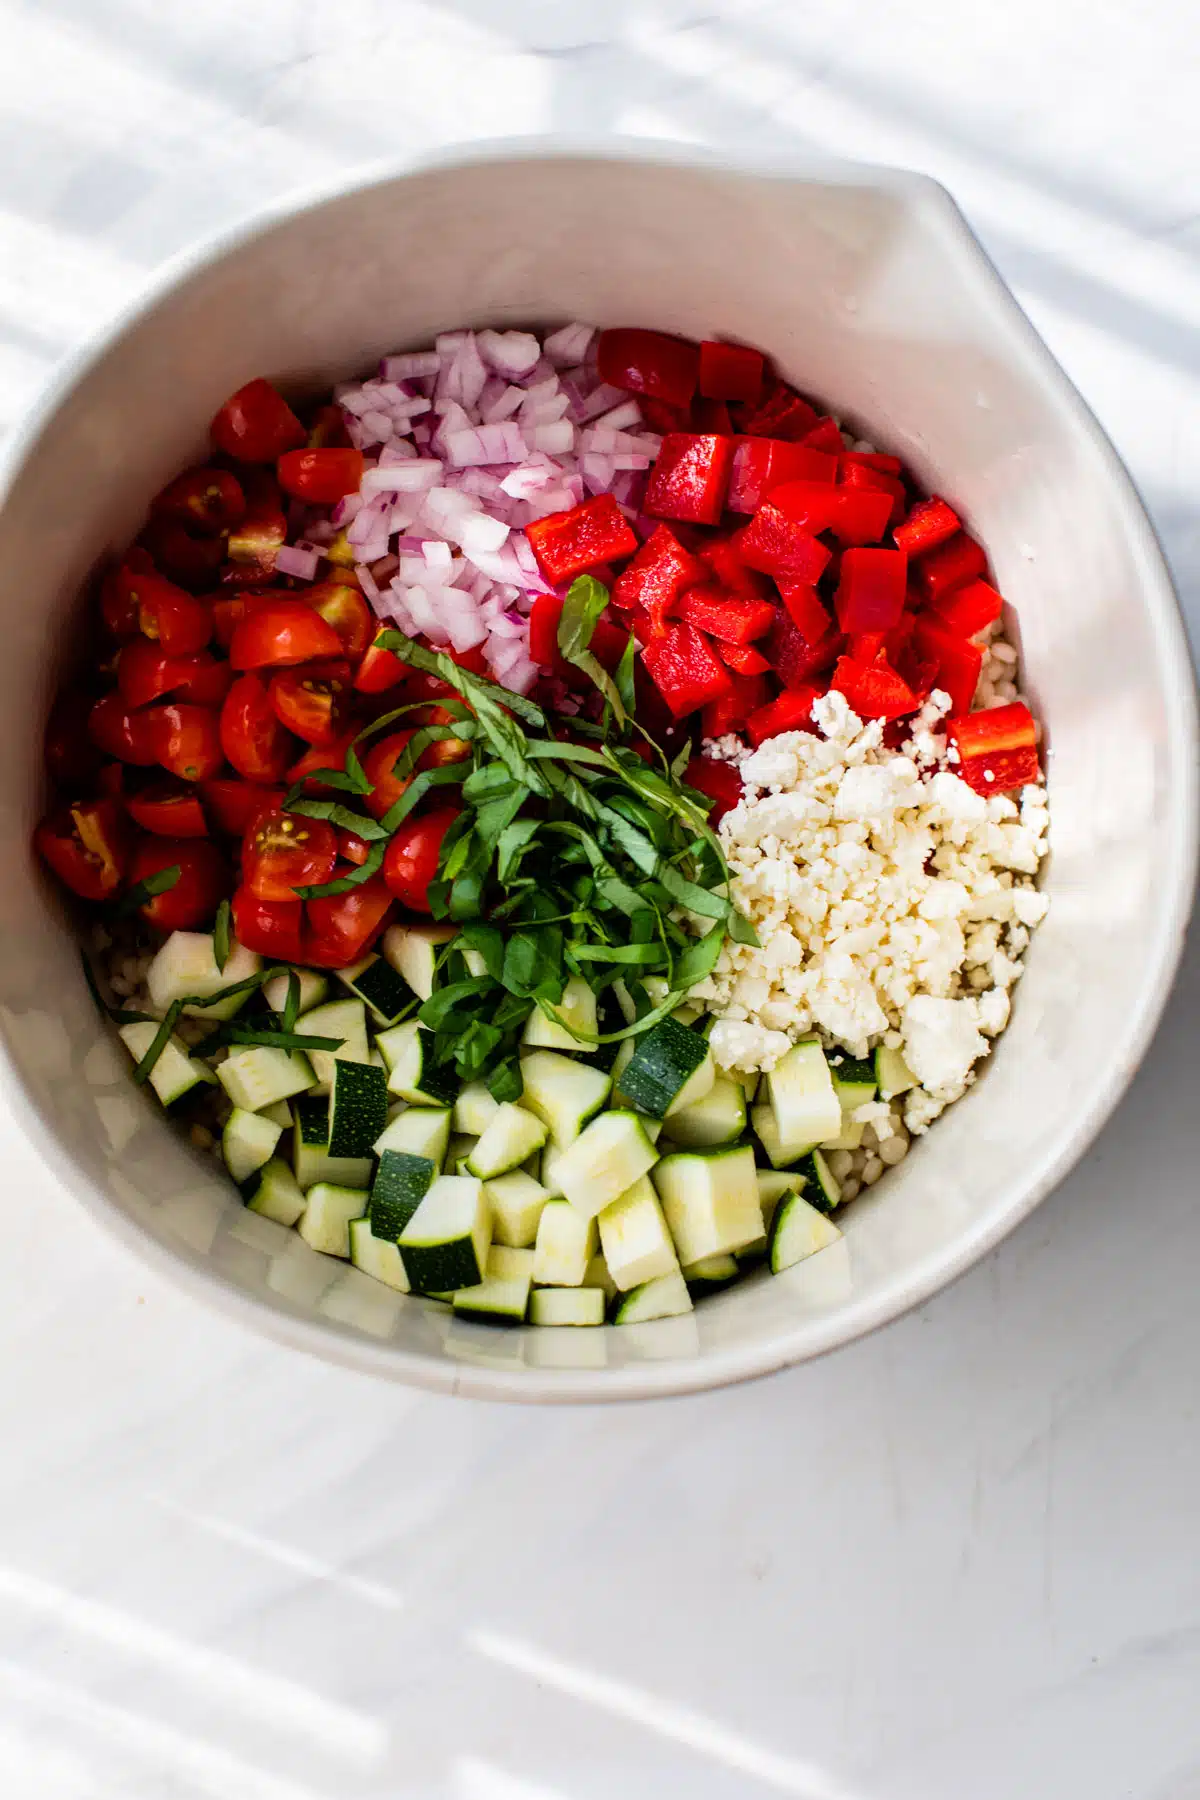 all ingredients for the vegetable couscous separated in a mixing bowl